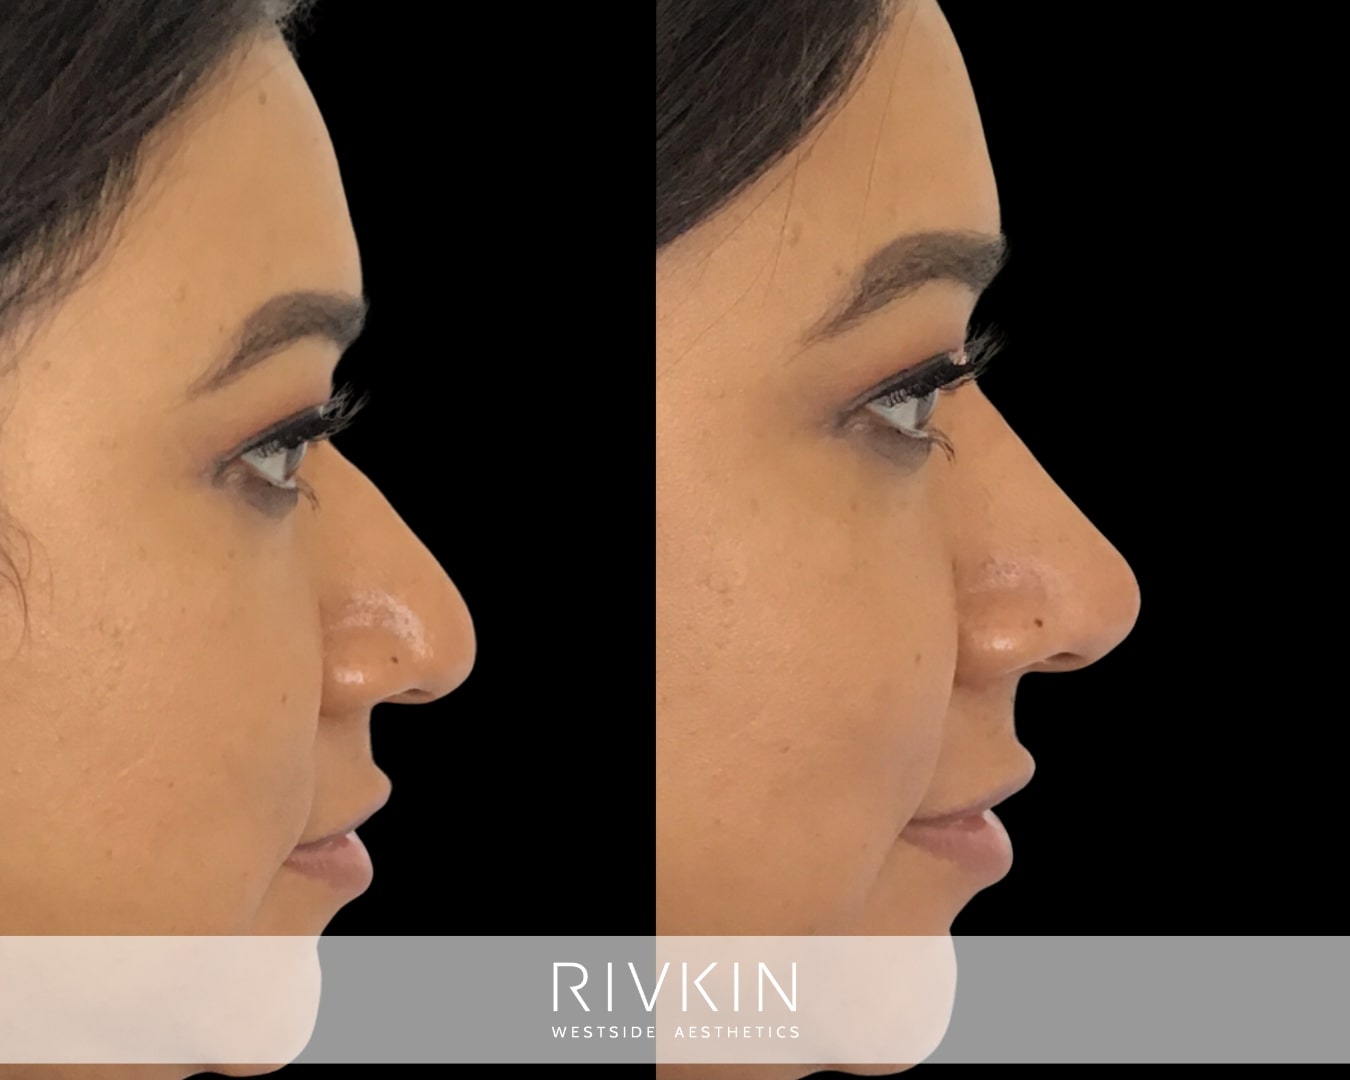 A nose with a rounded tip can be made more pointy using injections of dermal filler. The Non Surgical Nose Job allows patients to make changes to the appearance of their nose, without the risks and downtime of surgery. This patient desired a nose that was more defined, and straighter on the profile.